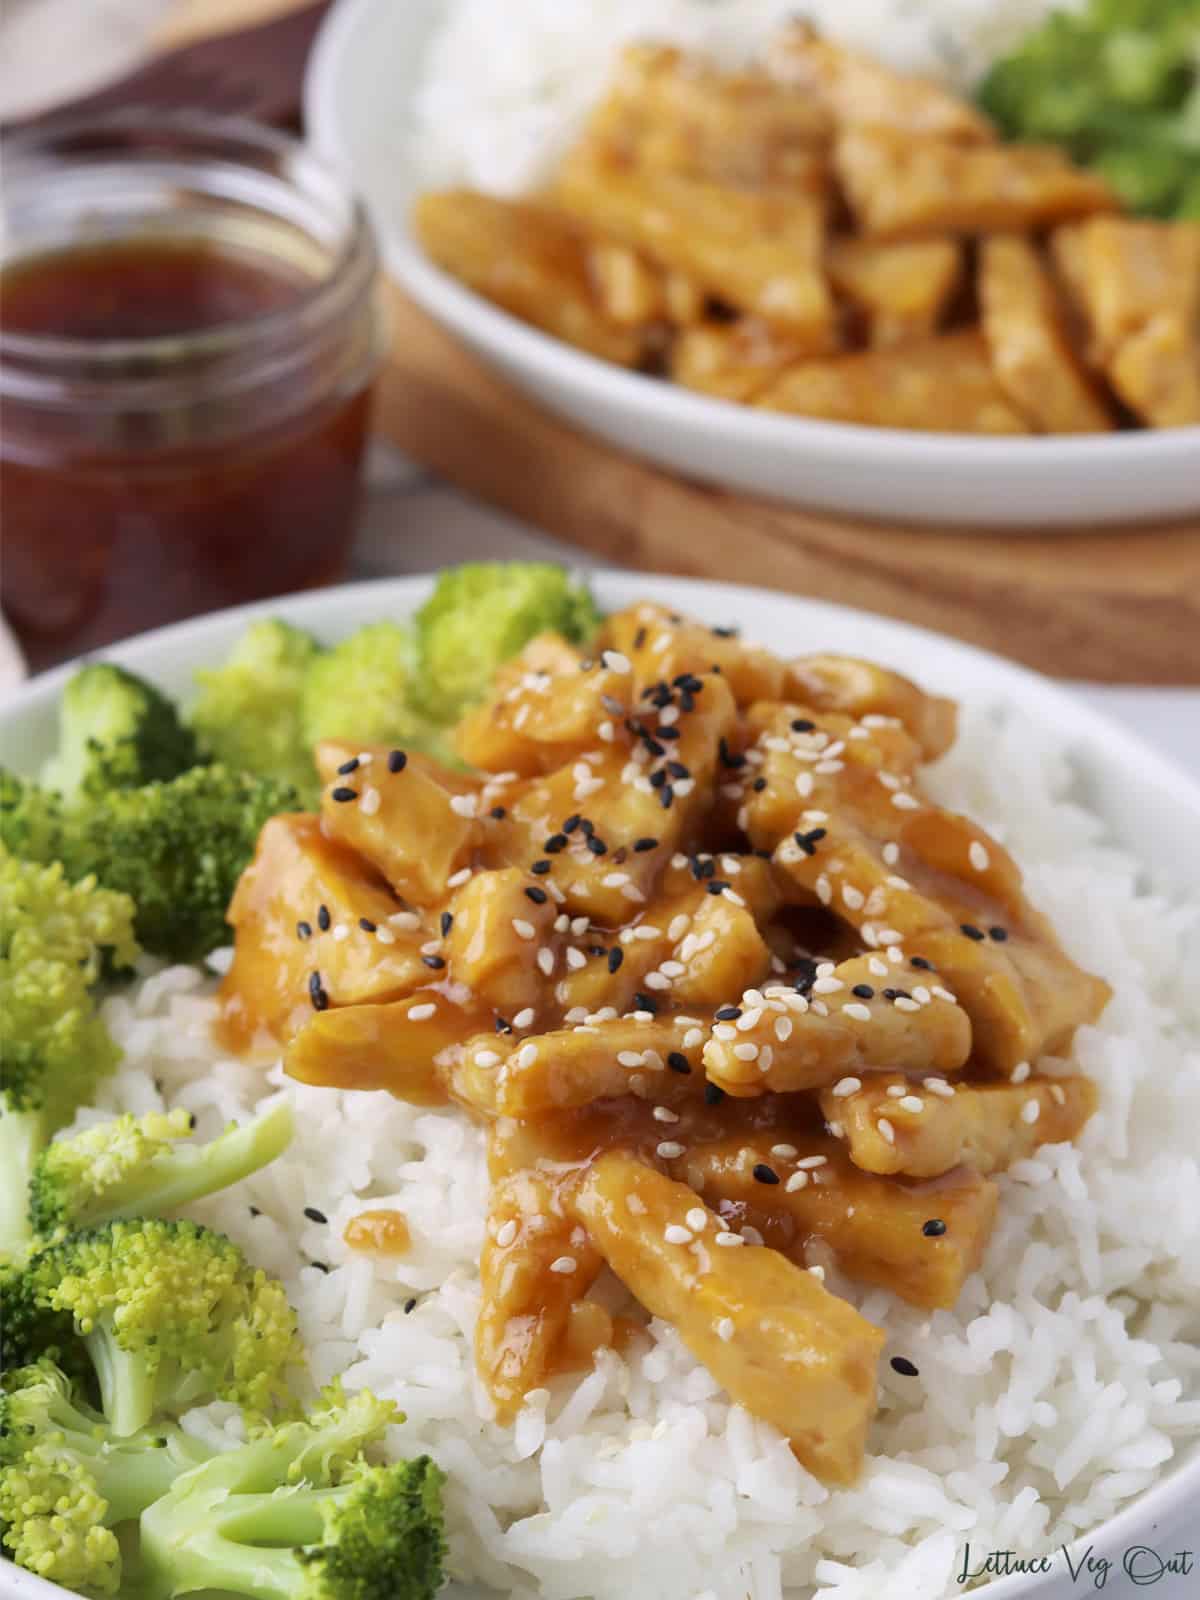 Teriyaki tempeh, rice and broccoli on a plate with second plate and jar of teriyaki sauce in back.